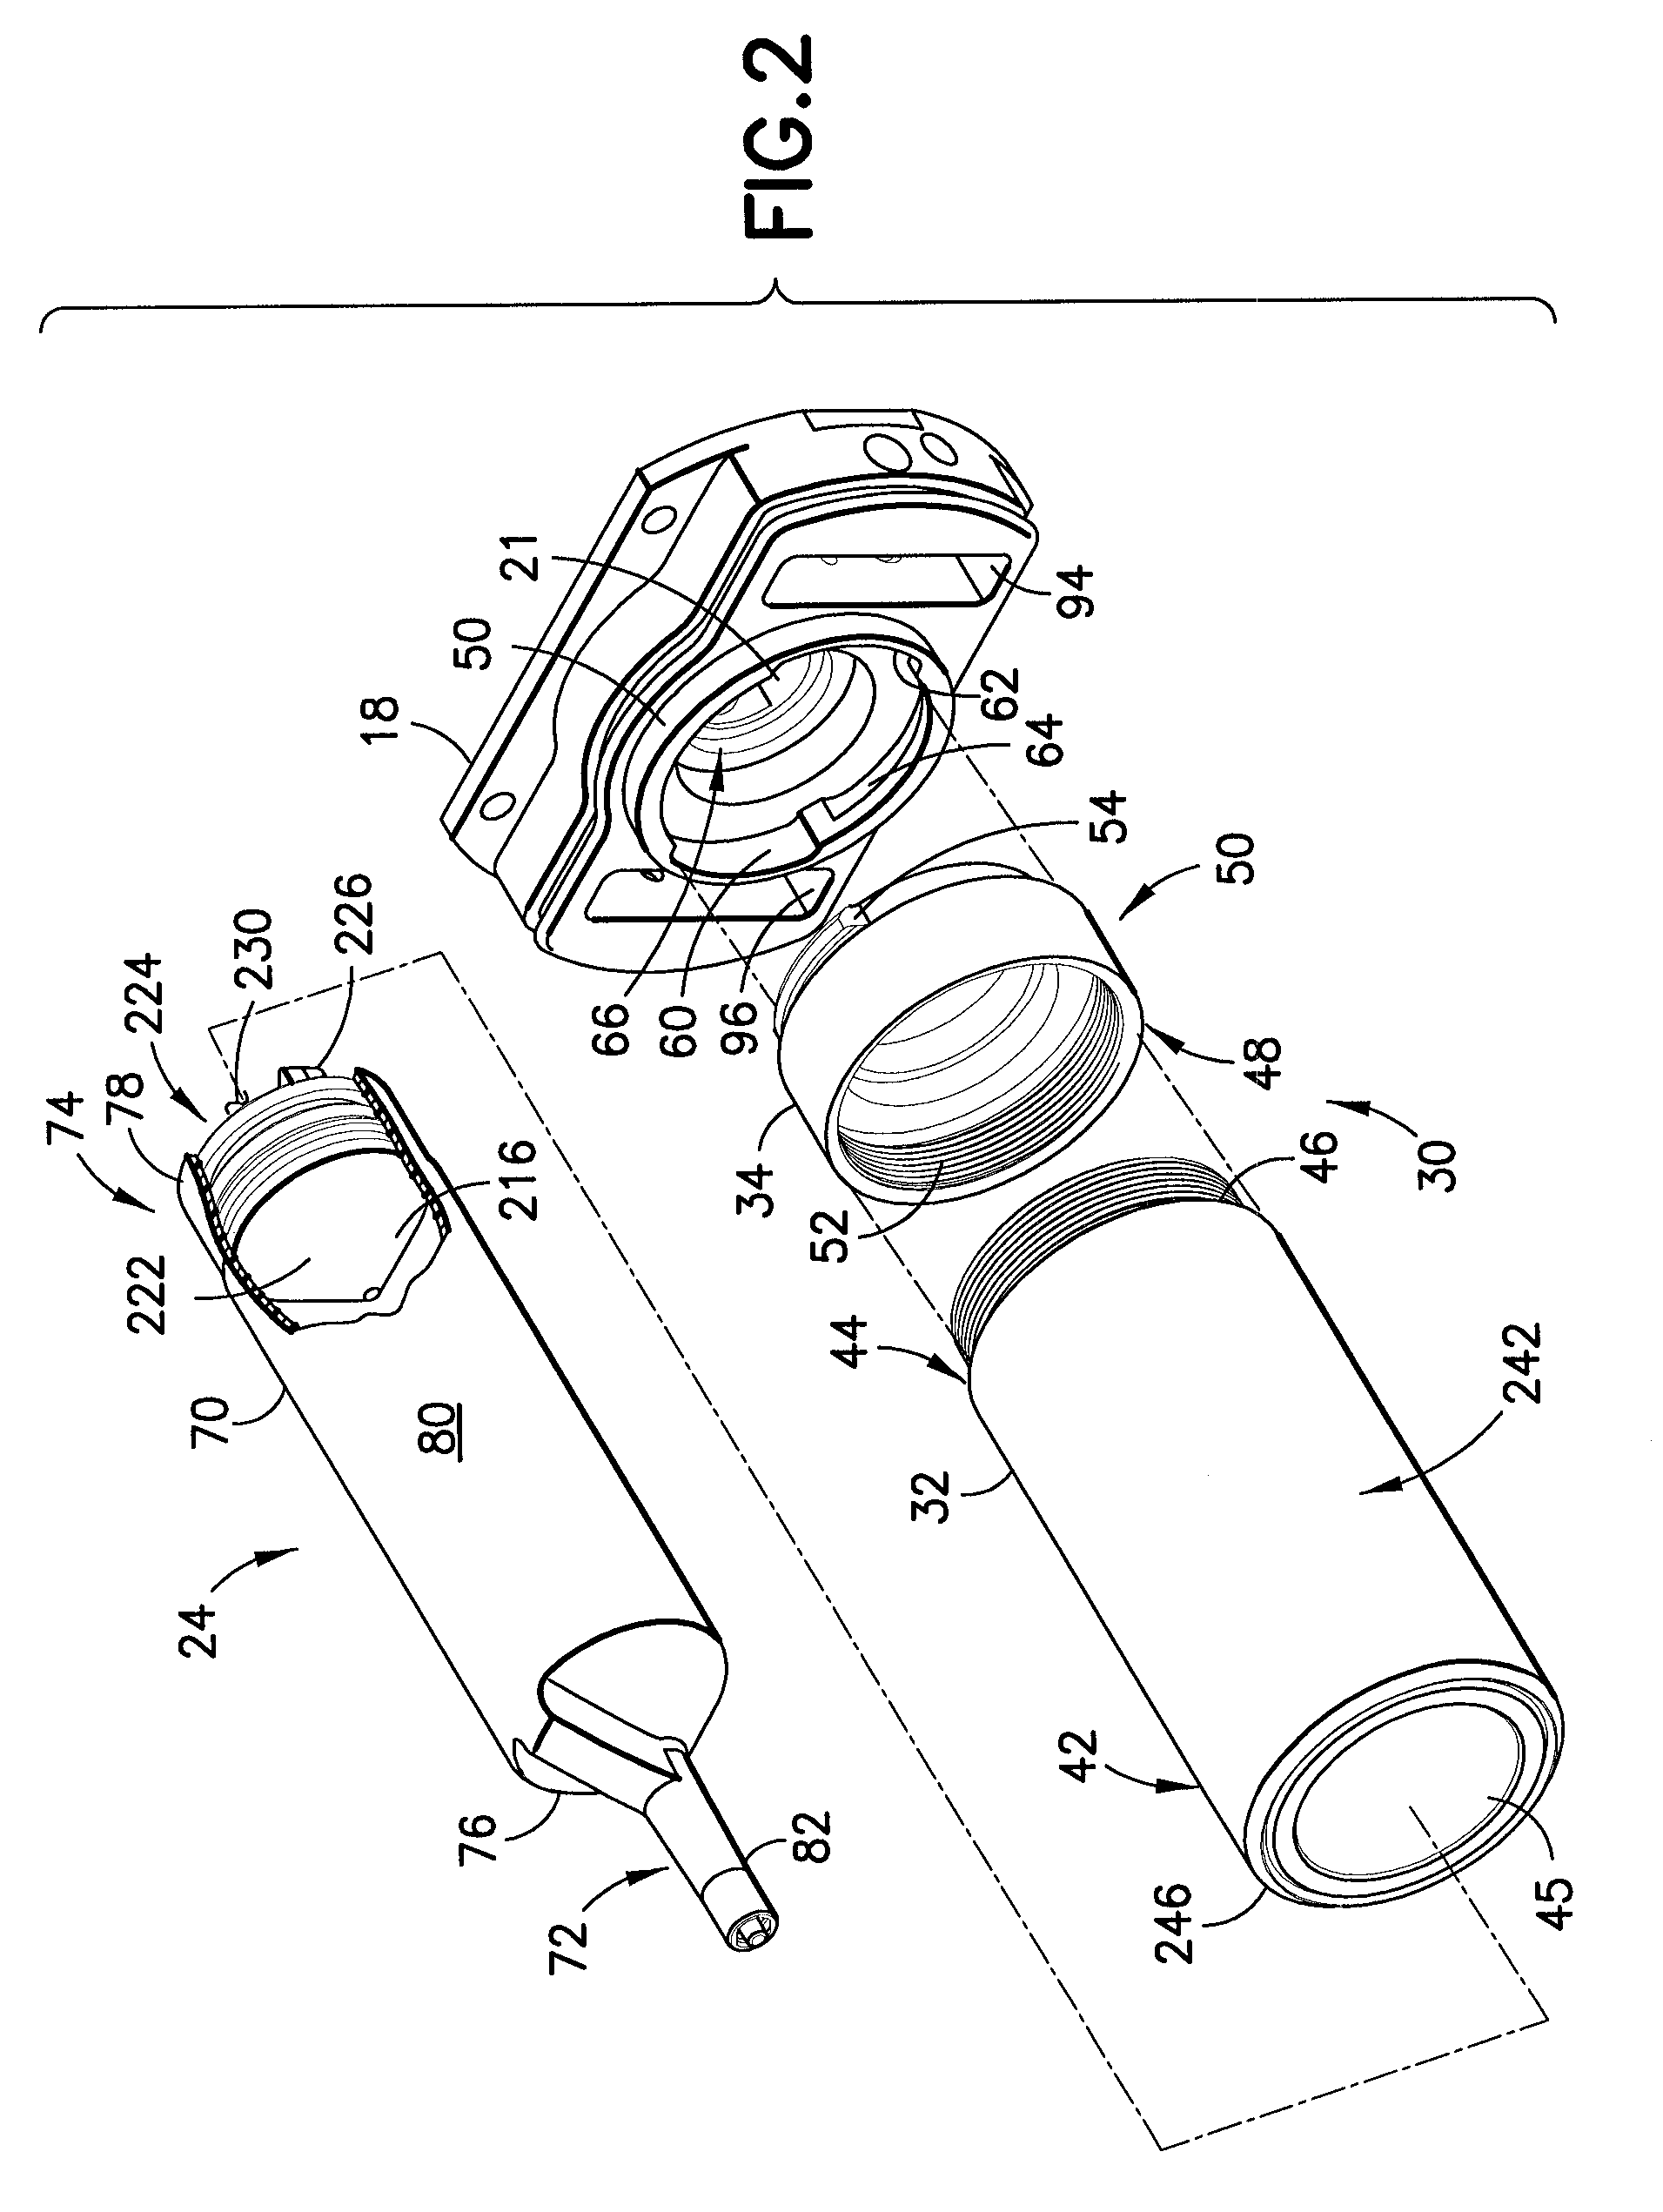 Fluid injection system and pressure jacket assembly with syringe illumination